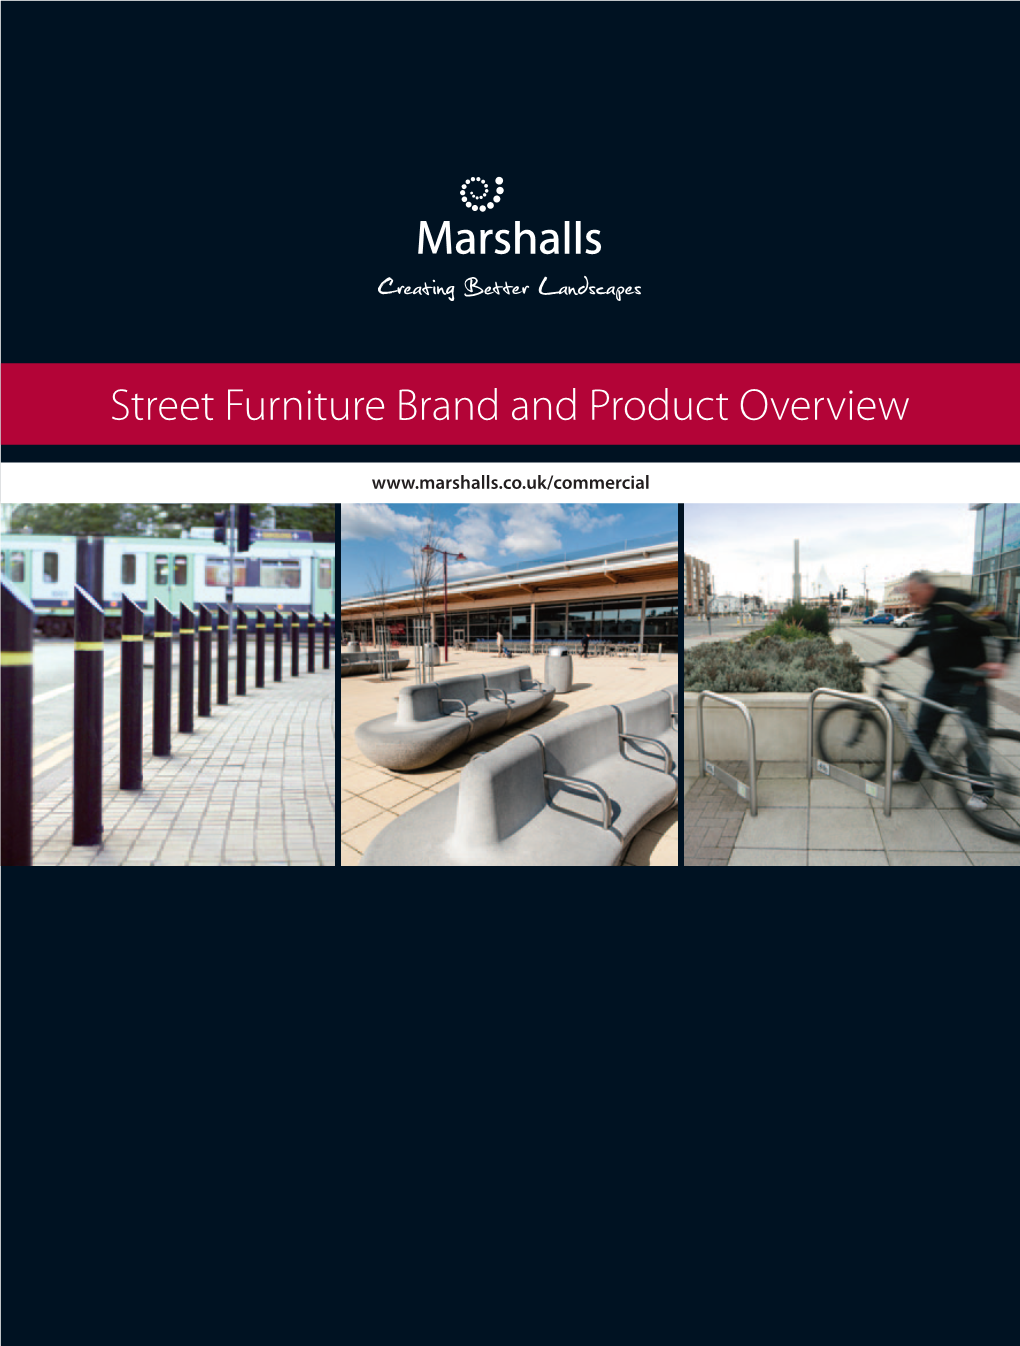 Street Furniture Brand and Product Overview